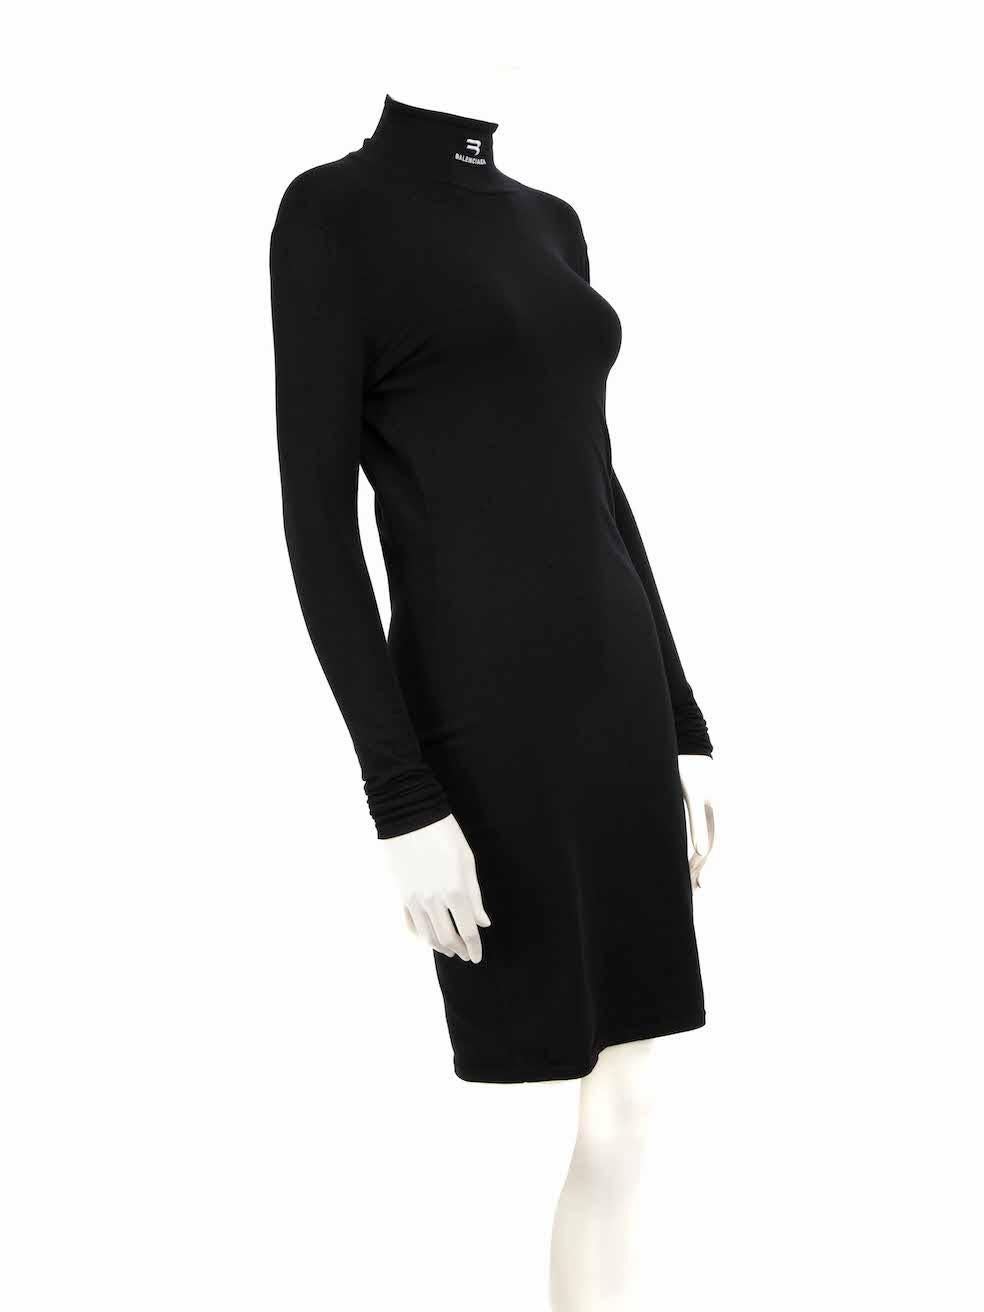 CONDITION is Very good. Hardly any visible wear to dress is evident on this used Balenciaga designer resale item.
 
 
 
 Details
 
 
 Black
 
 Synthetic
 
 Knee length dress
 
 Stretchy
 
 Turtleneck
 
 Logo embroidered detail
 
 Open back
 
 
 
 
